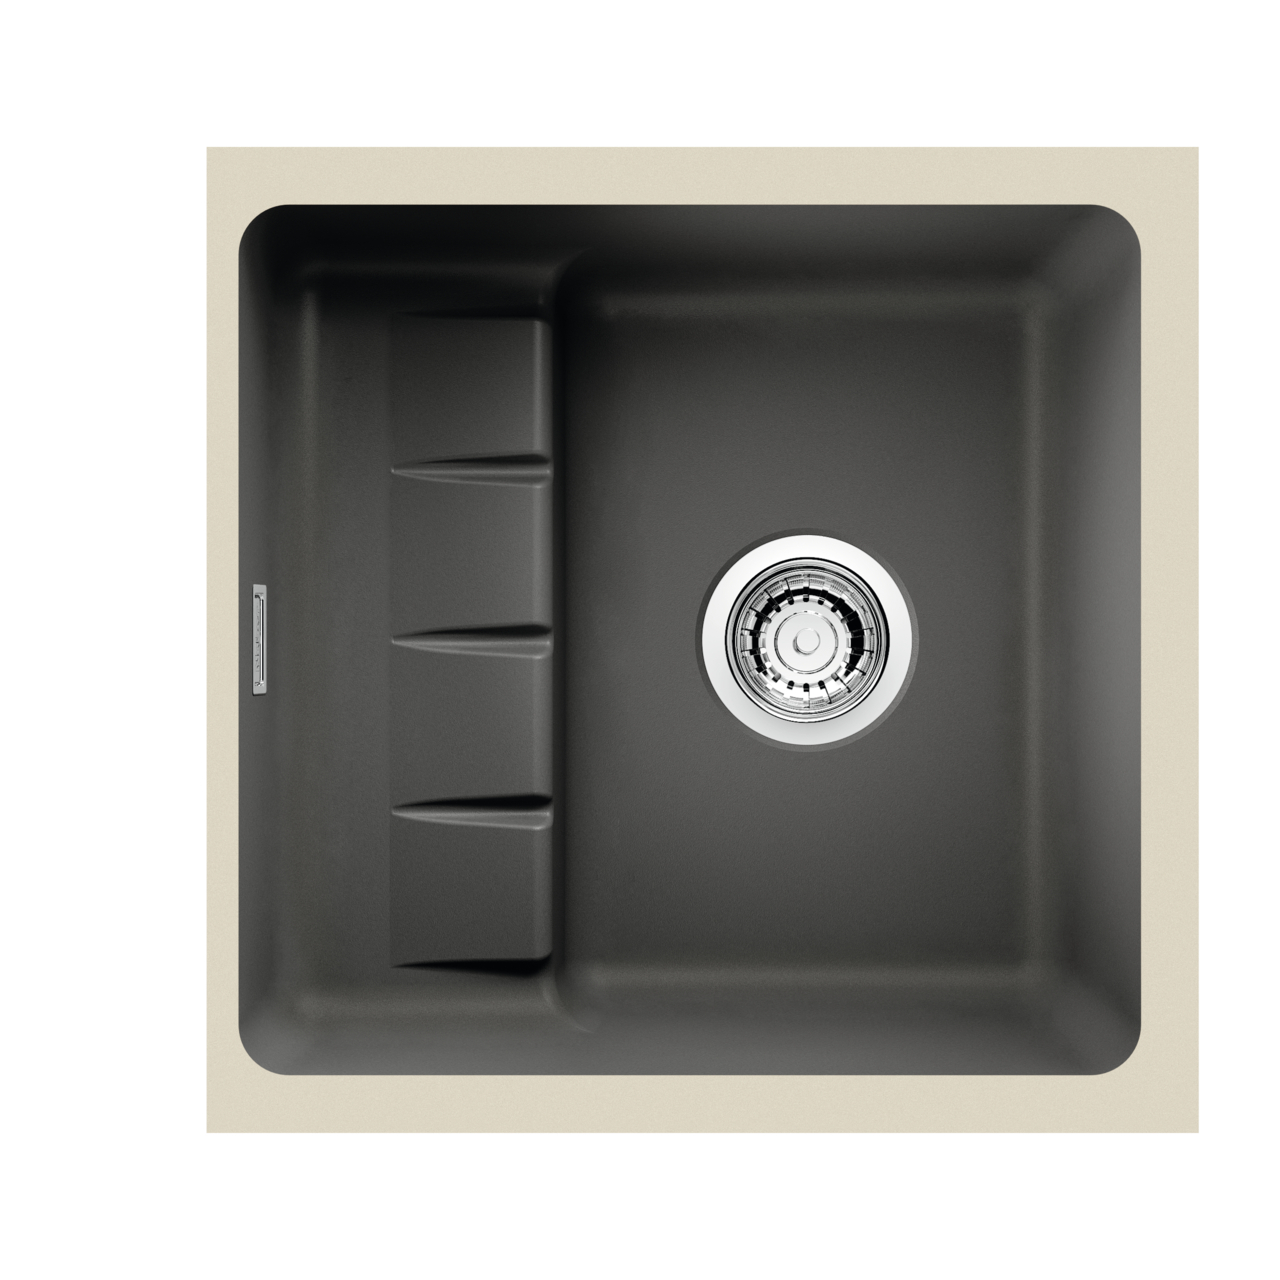  PickUP U – set 2, slate, cover cap brushed stainless steel, premium rotational excenter stainless steel, Arco 2 stainless steel finish